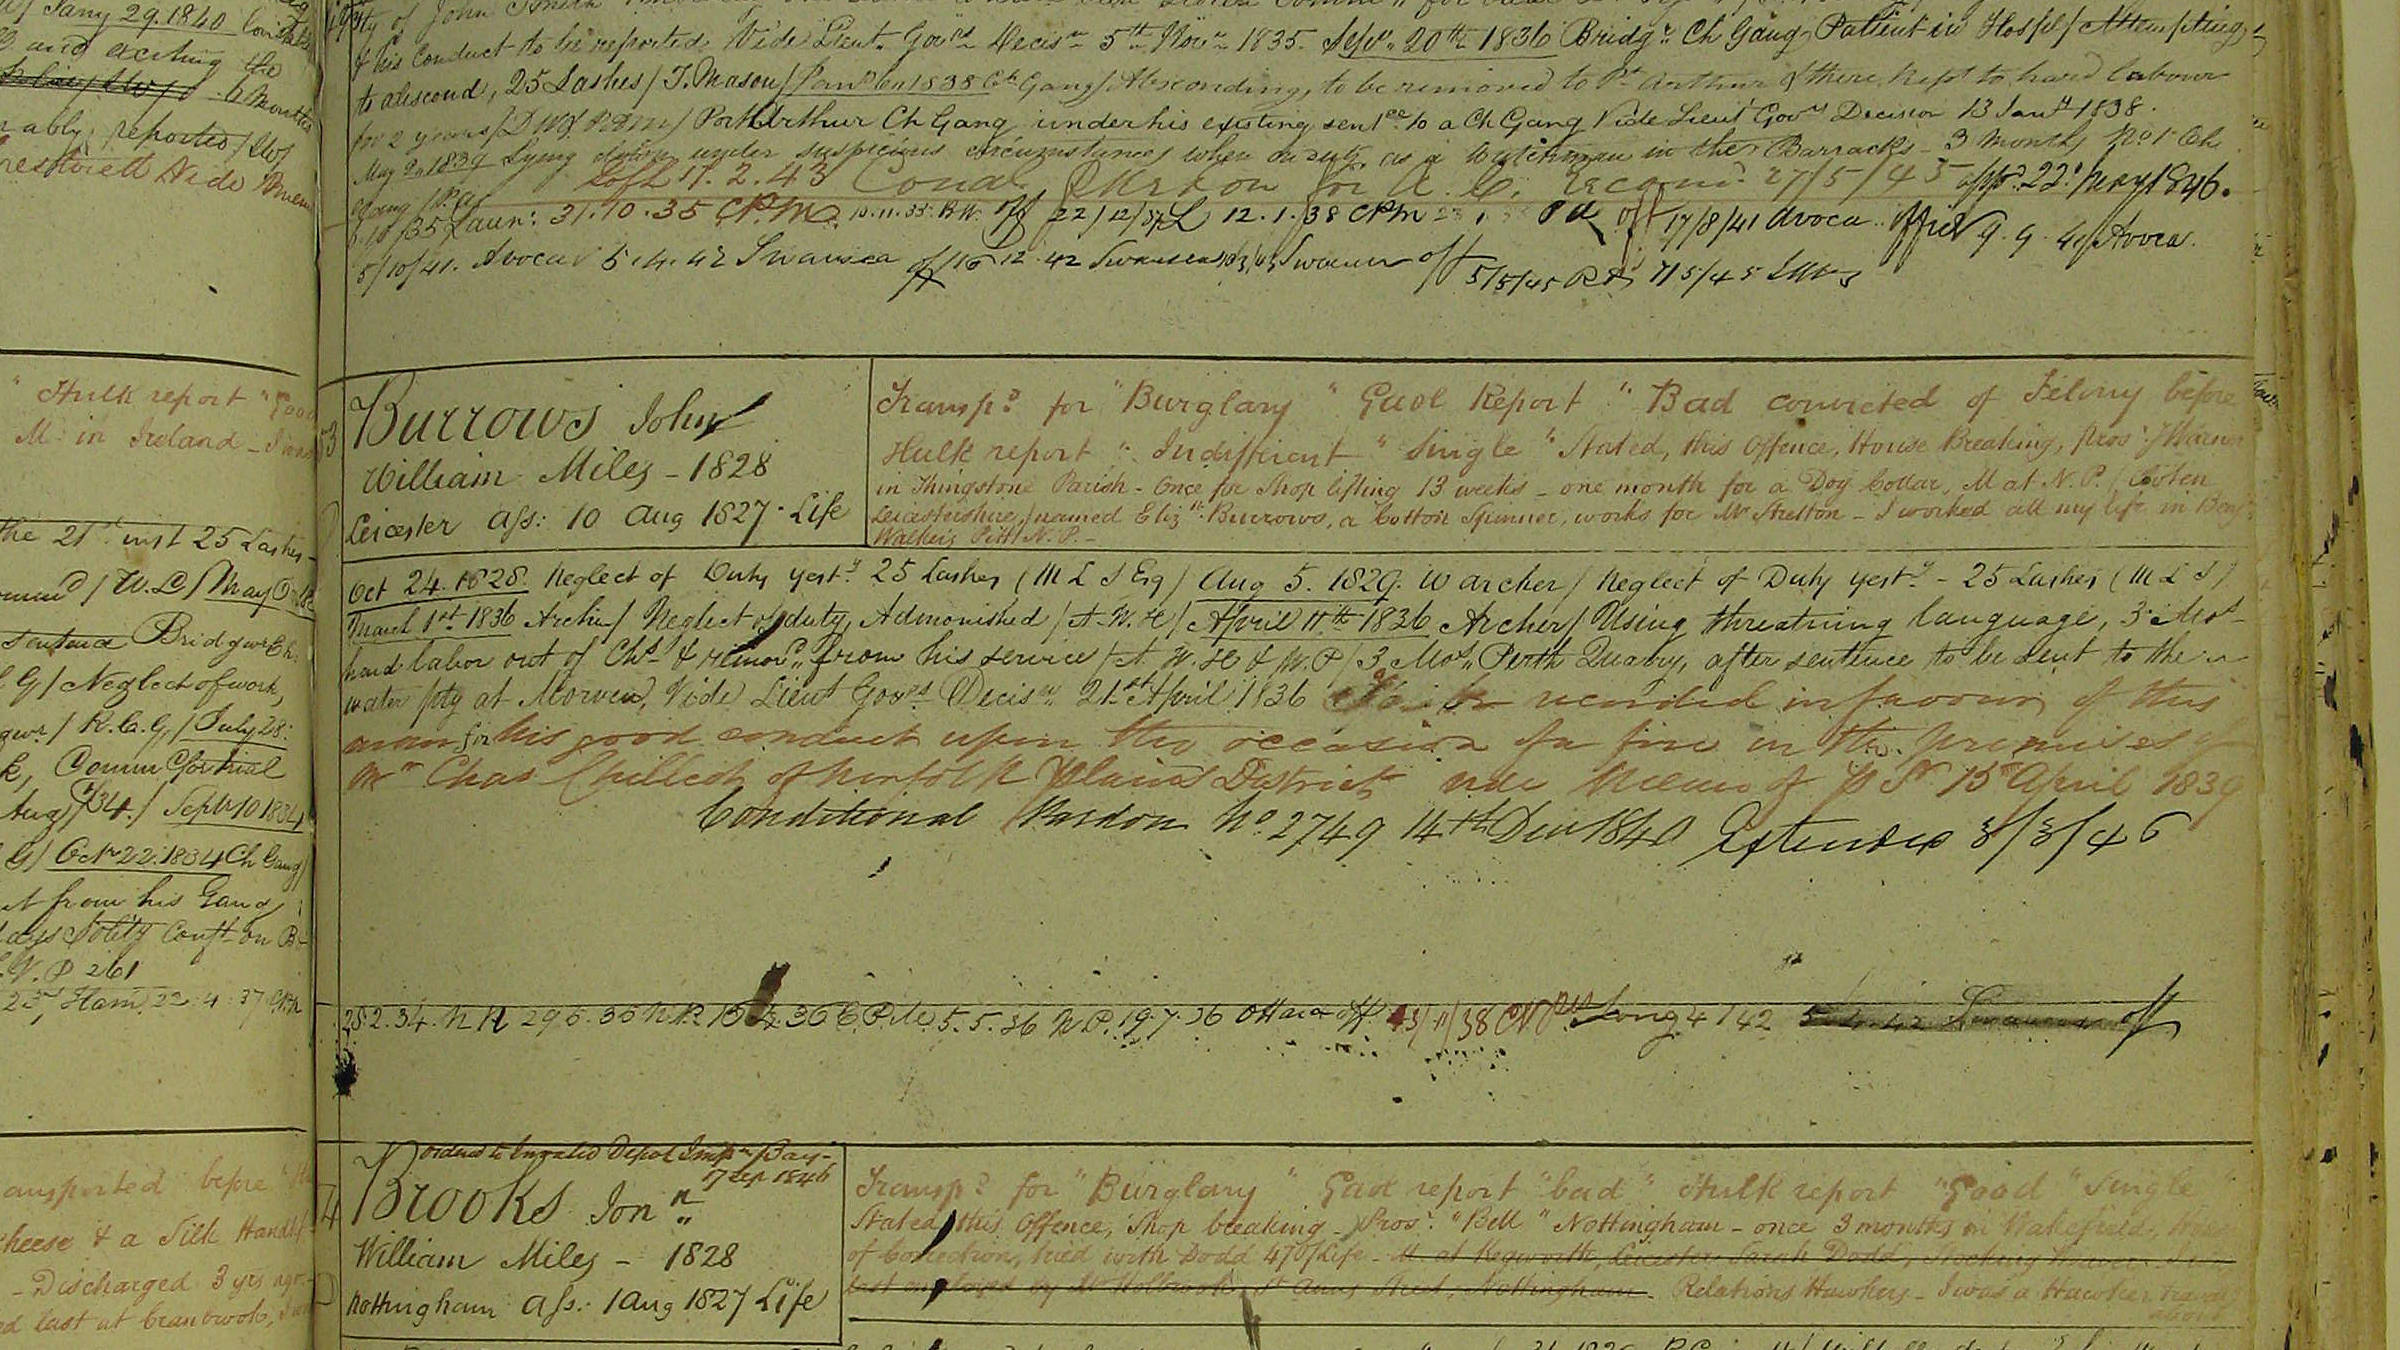 Excerpt from ledgers held as part of Brickendon Estate’s archives mentioning John Burrows.